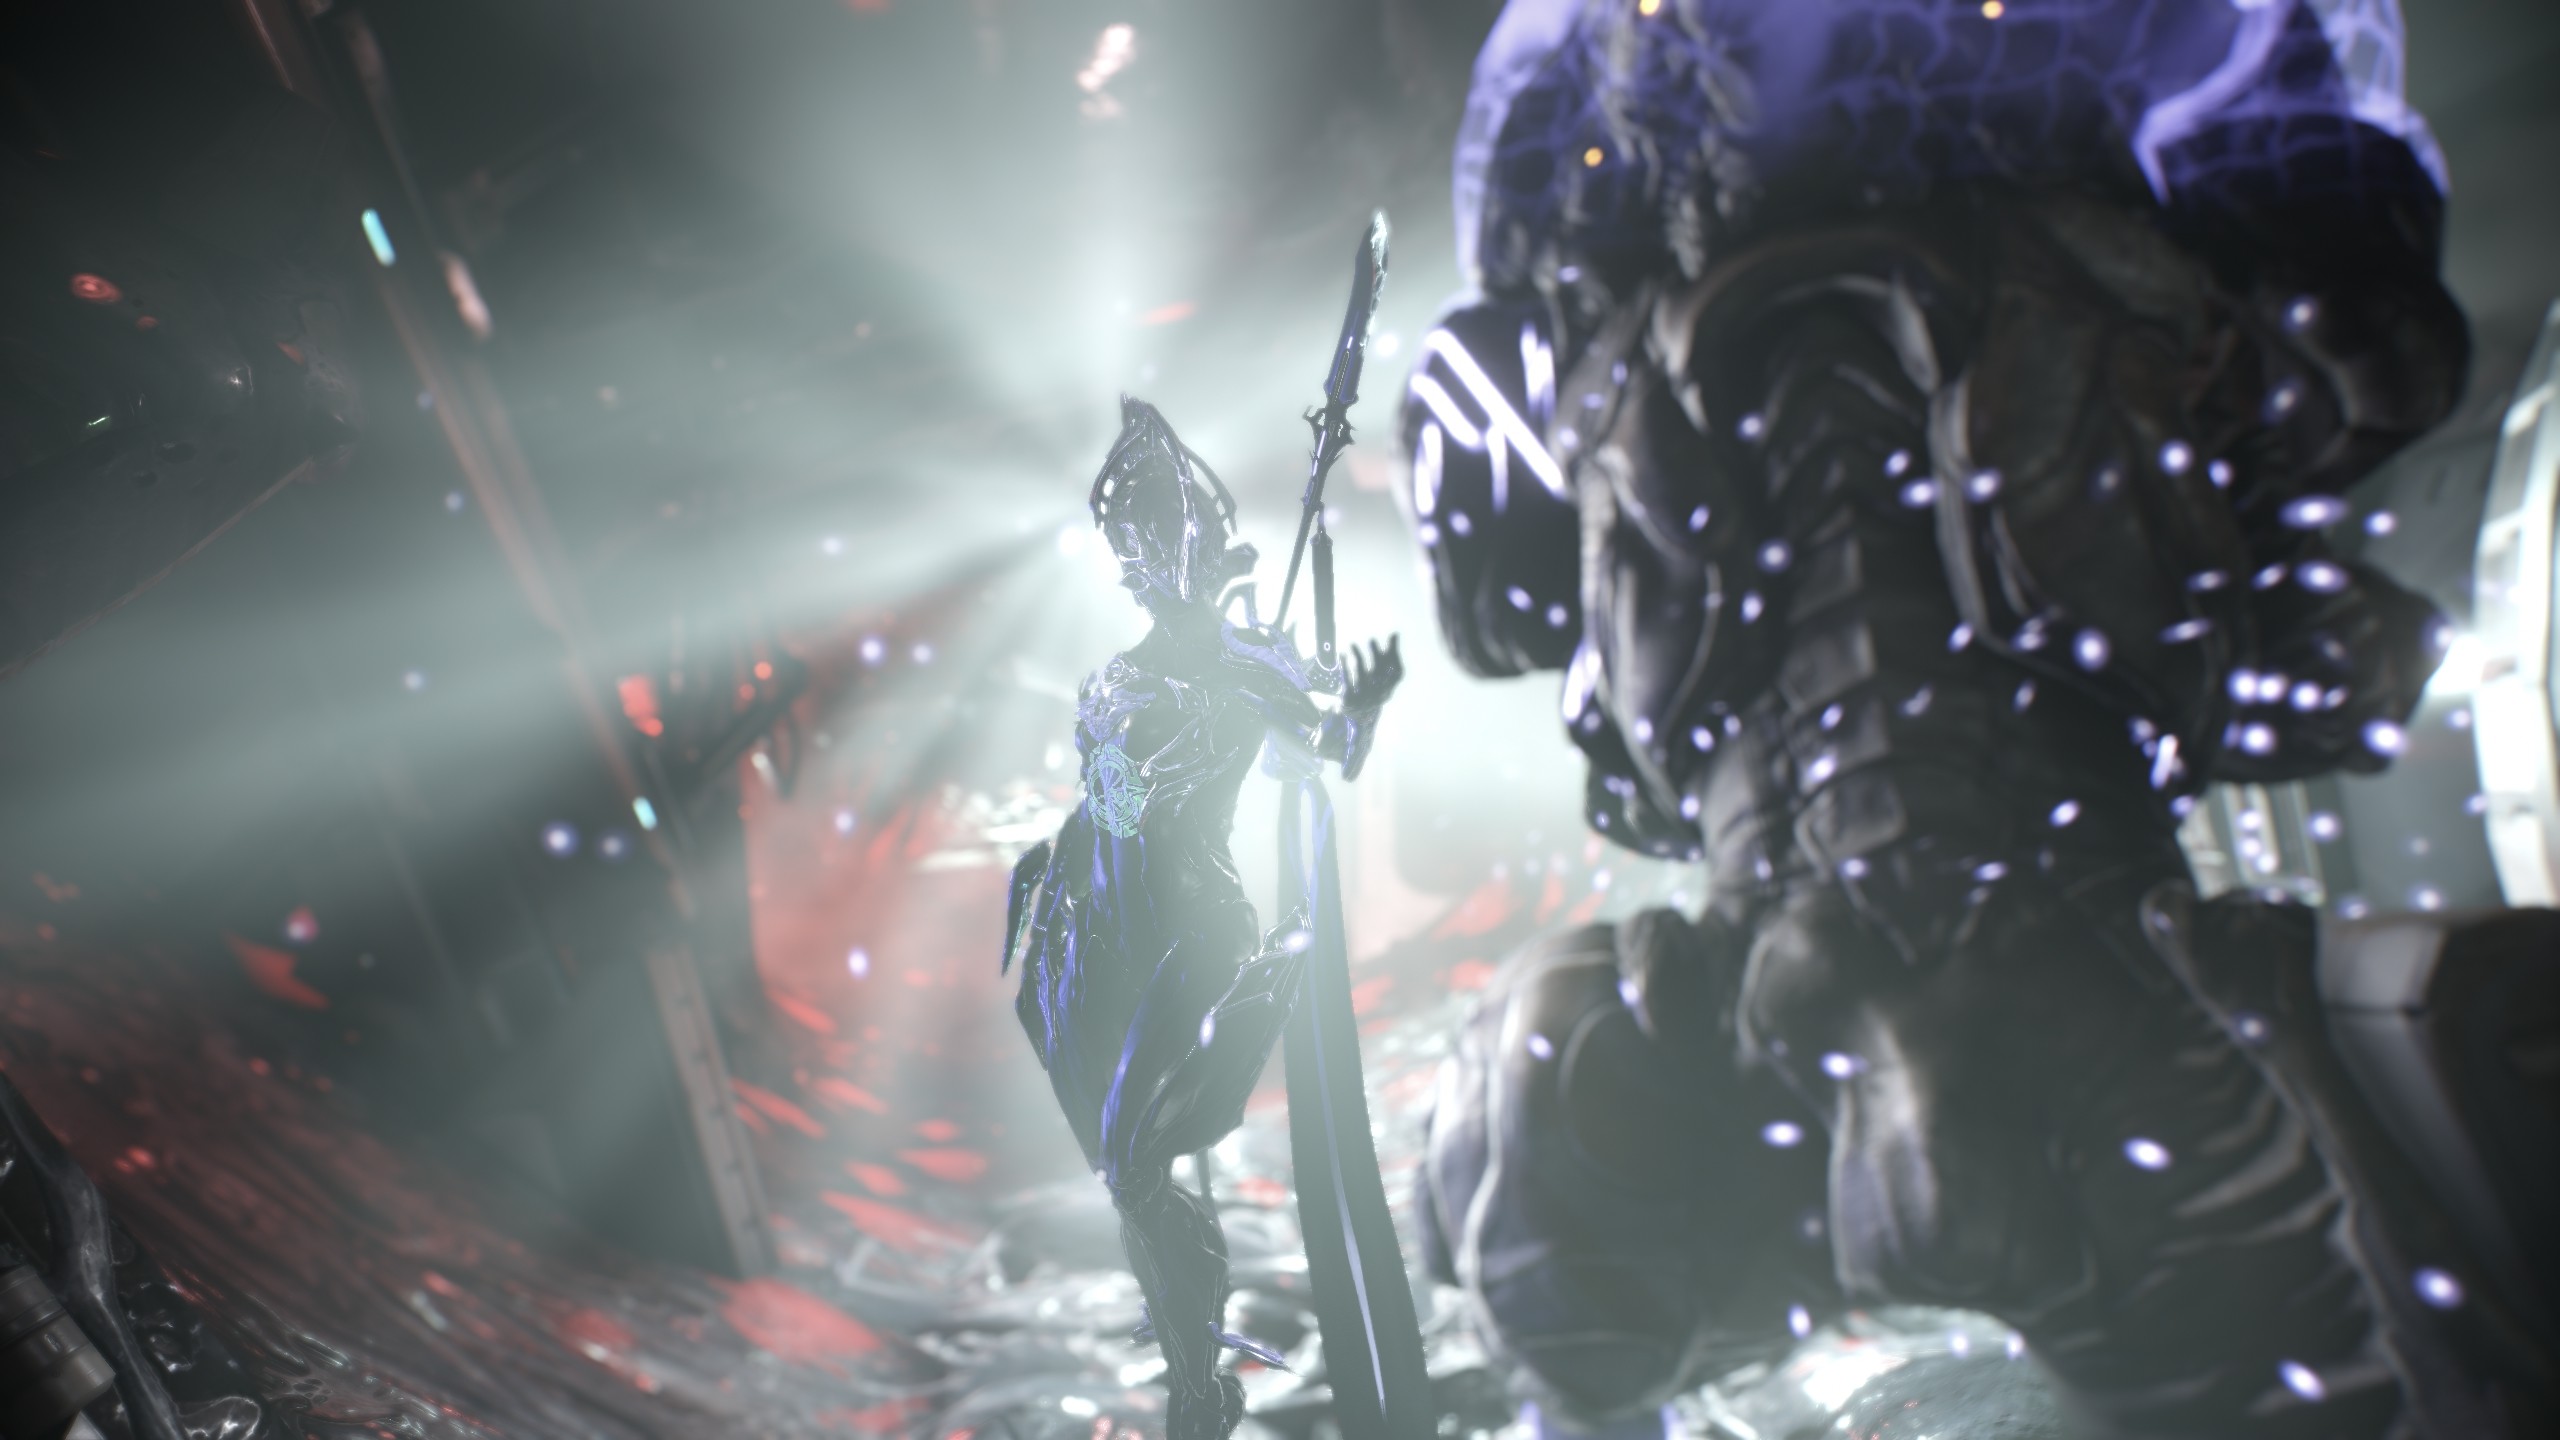 2560x1440 ScreenshotFirst serious attempt at Captura: The Touch of Nyx ...